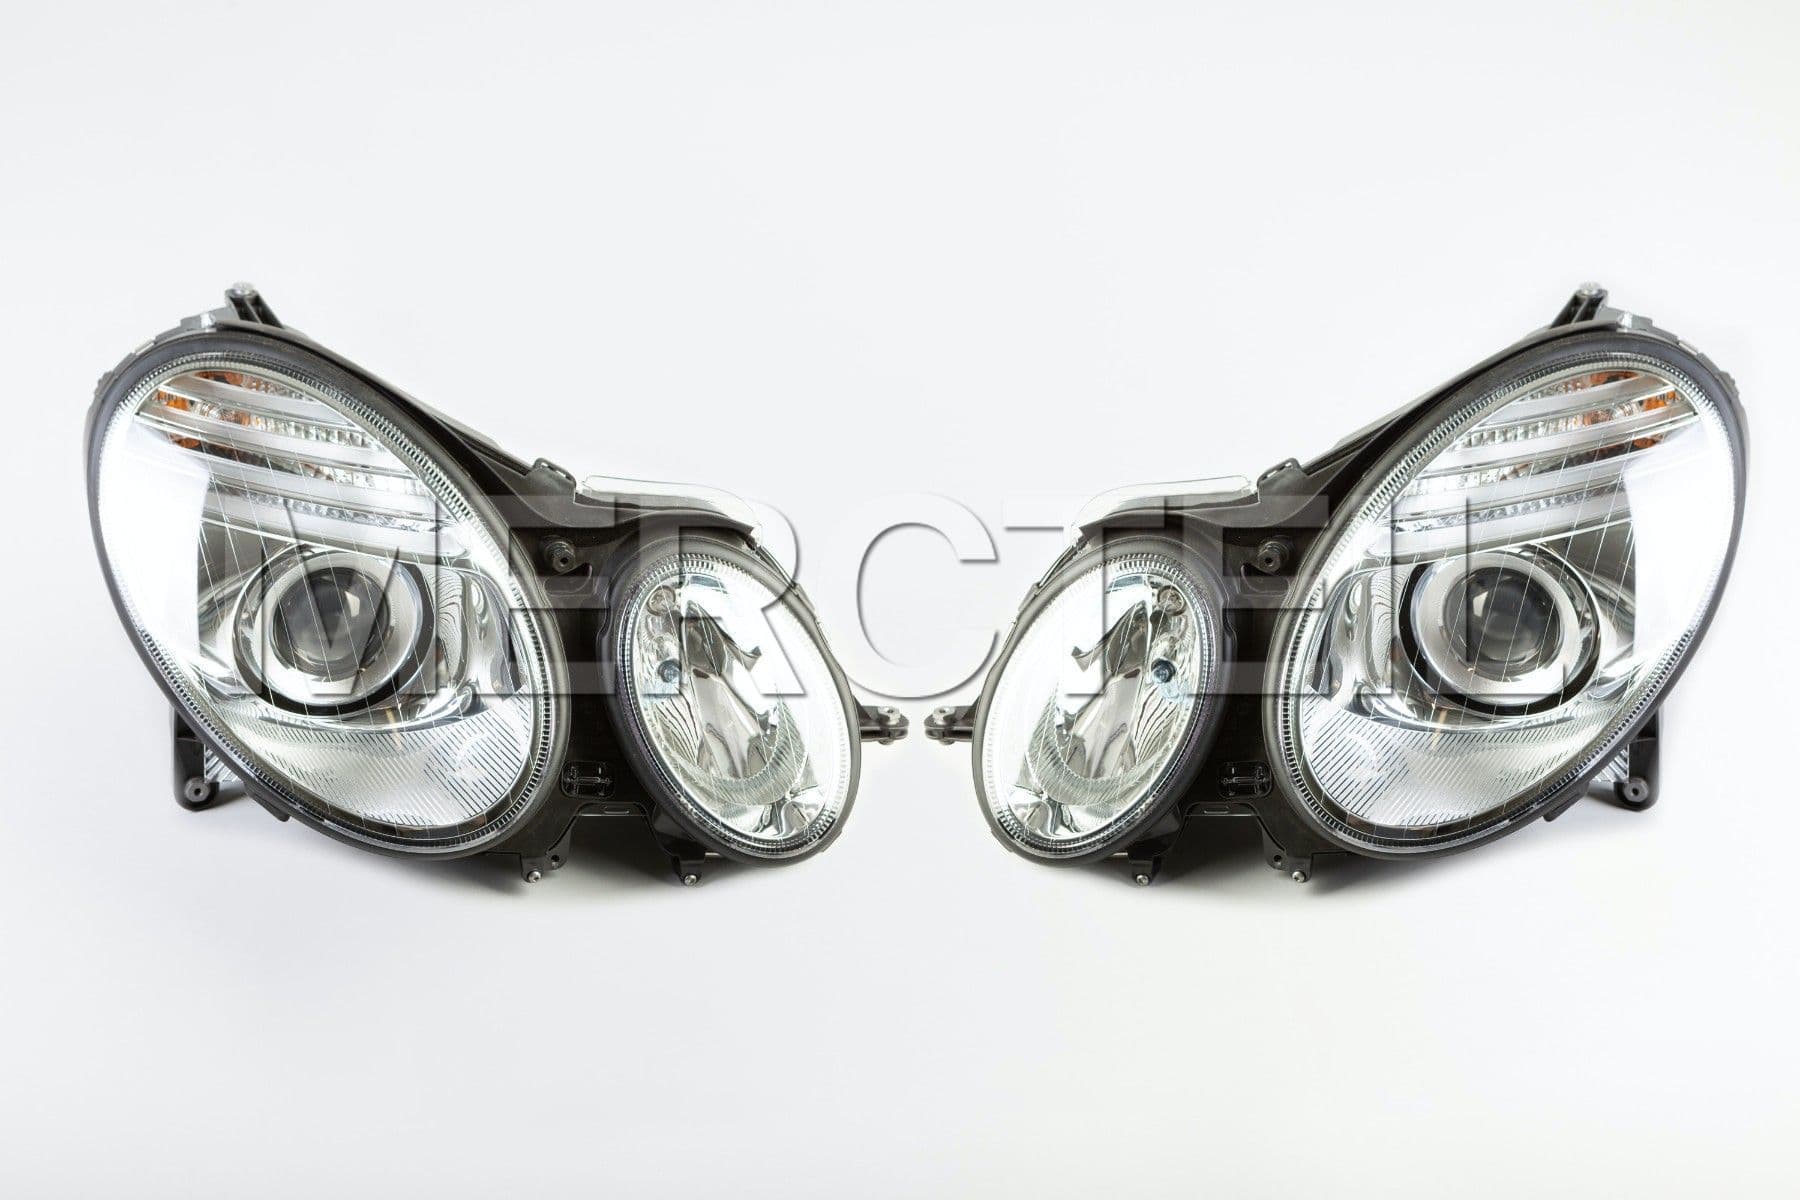 Xenon Headlights for E-Class (part number A2118202961)